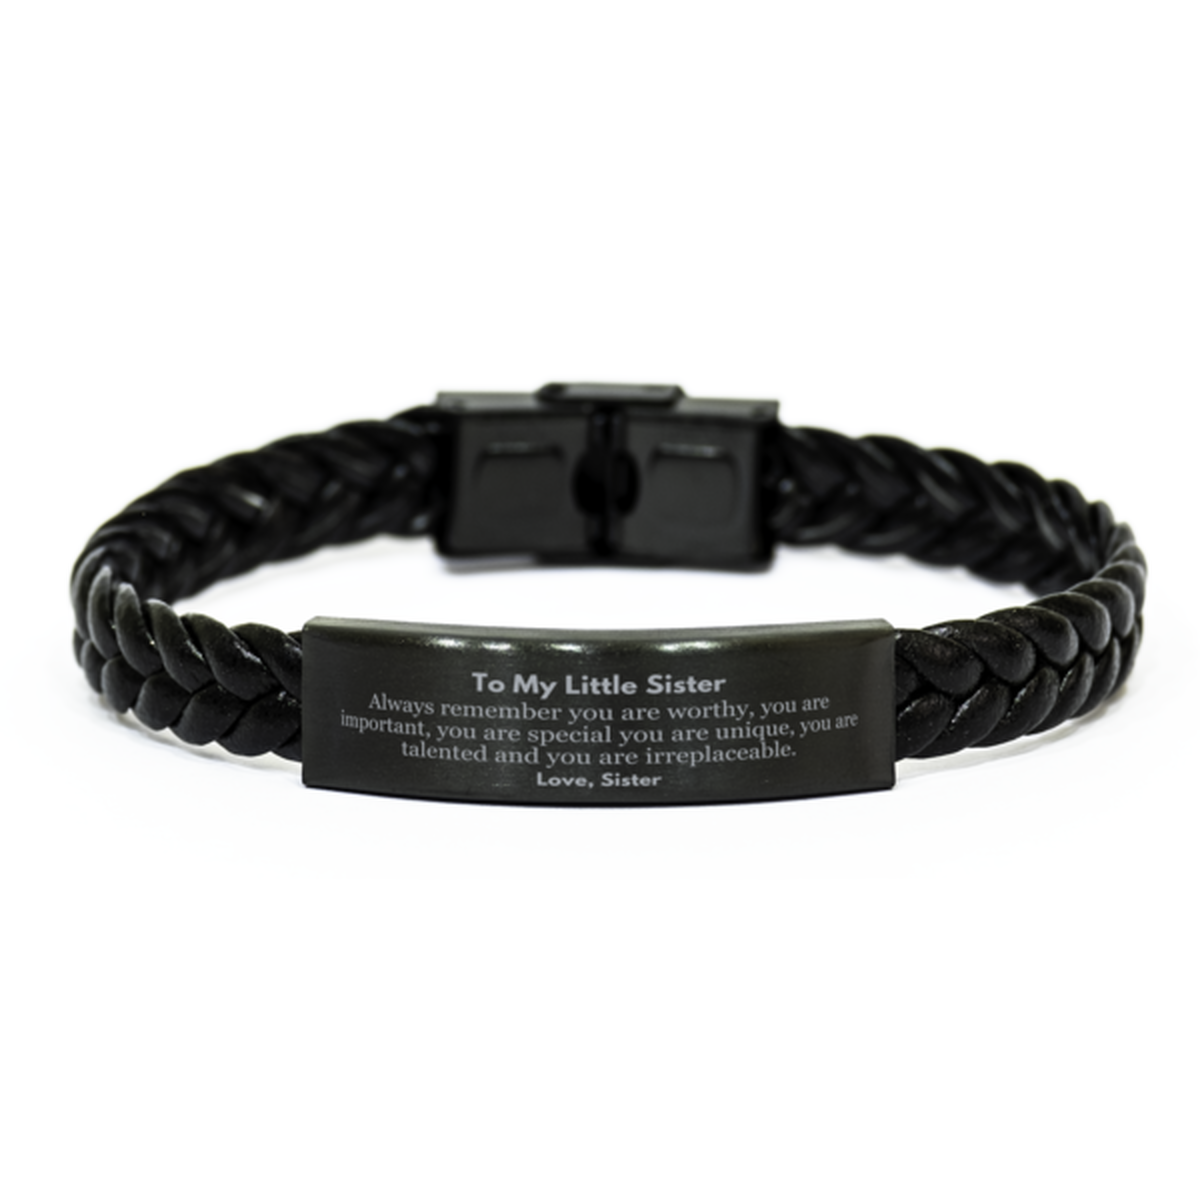 Little Sister Birthday Gifts from Sister, Inspirational Braided Leather Bracelet for Little Sister Christmas Graduation Gifts for Little Sister Always remember you are worthy, you are important. Love, Sister